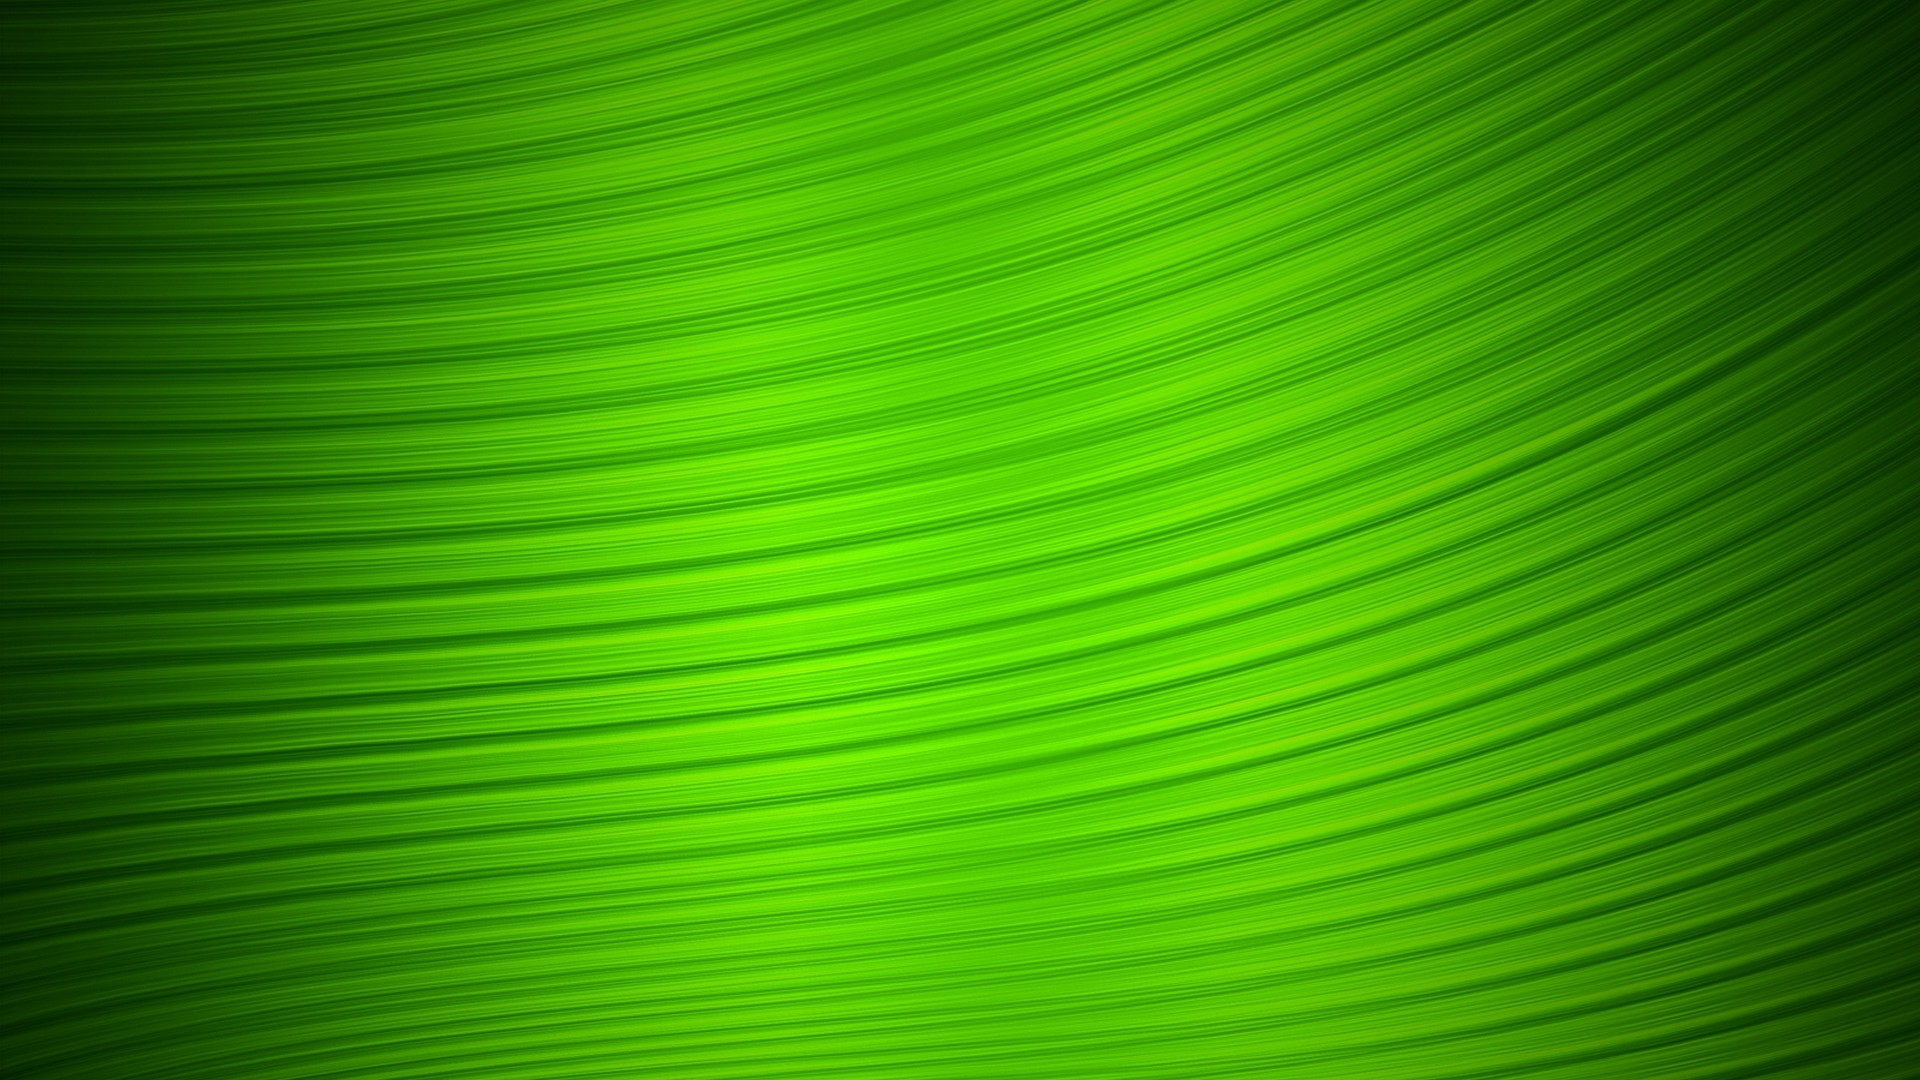 Best Green Colour Wallpaper HD with image resolution 1920x1080 pixel. You can make this wallpaper for your Desktop Computer Backgrounds, Mac Wallpapers, Android Lock screen or iPhone Screensavers